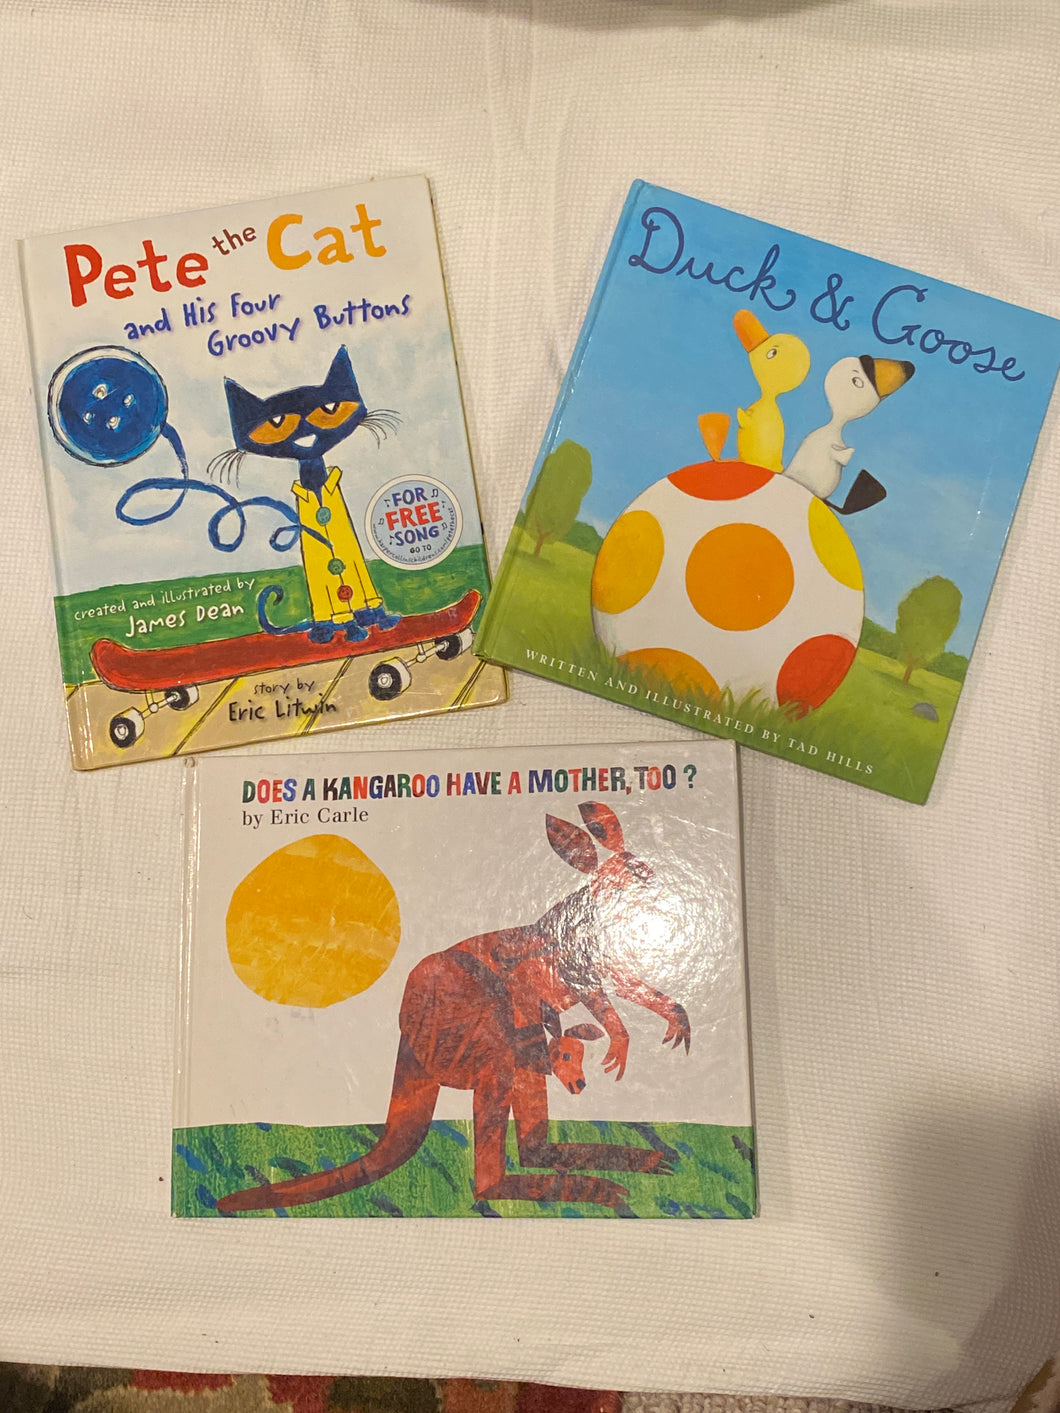 Pete the Cat, Duck and Goose, Does a Kangaroo have a Mother